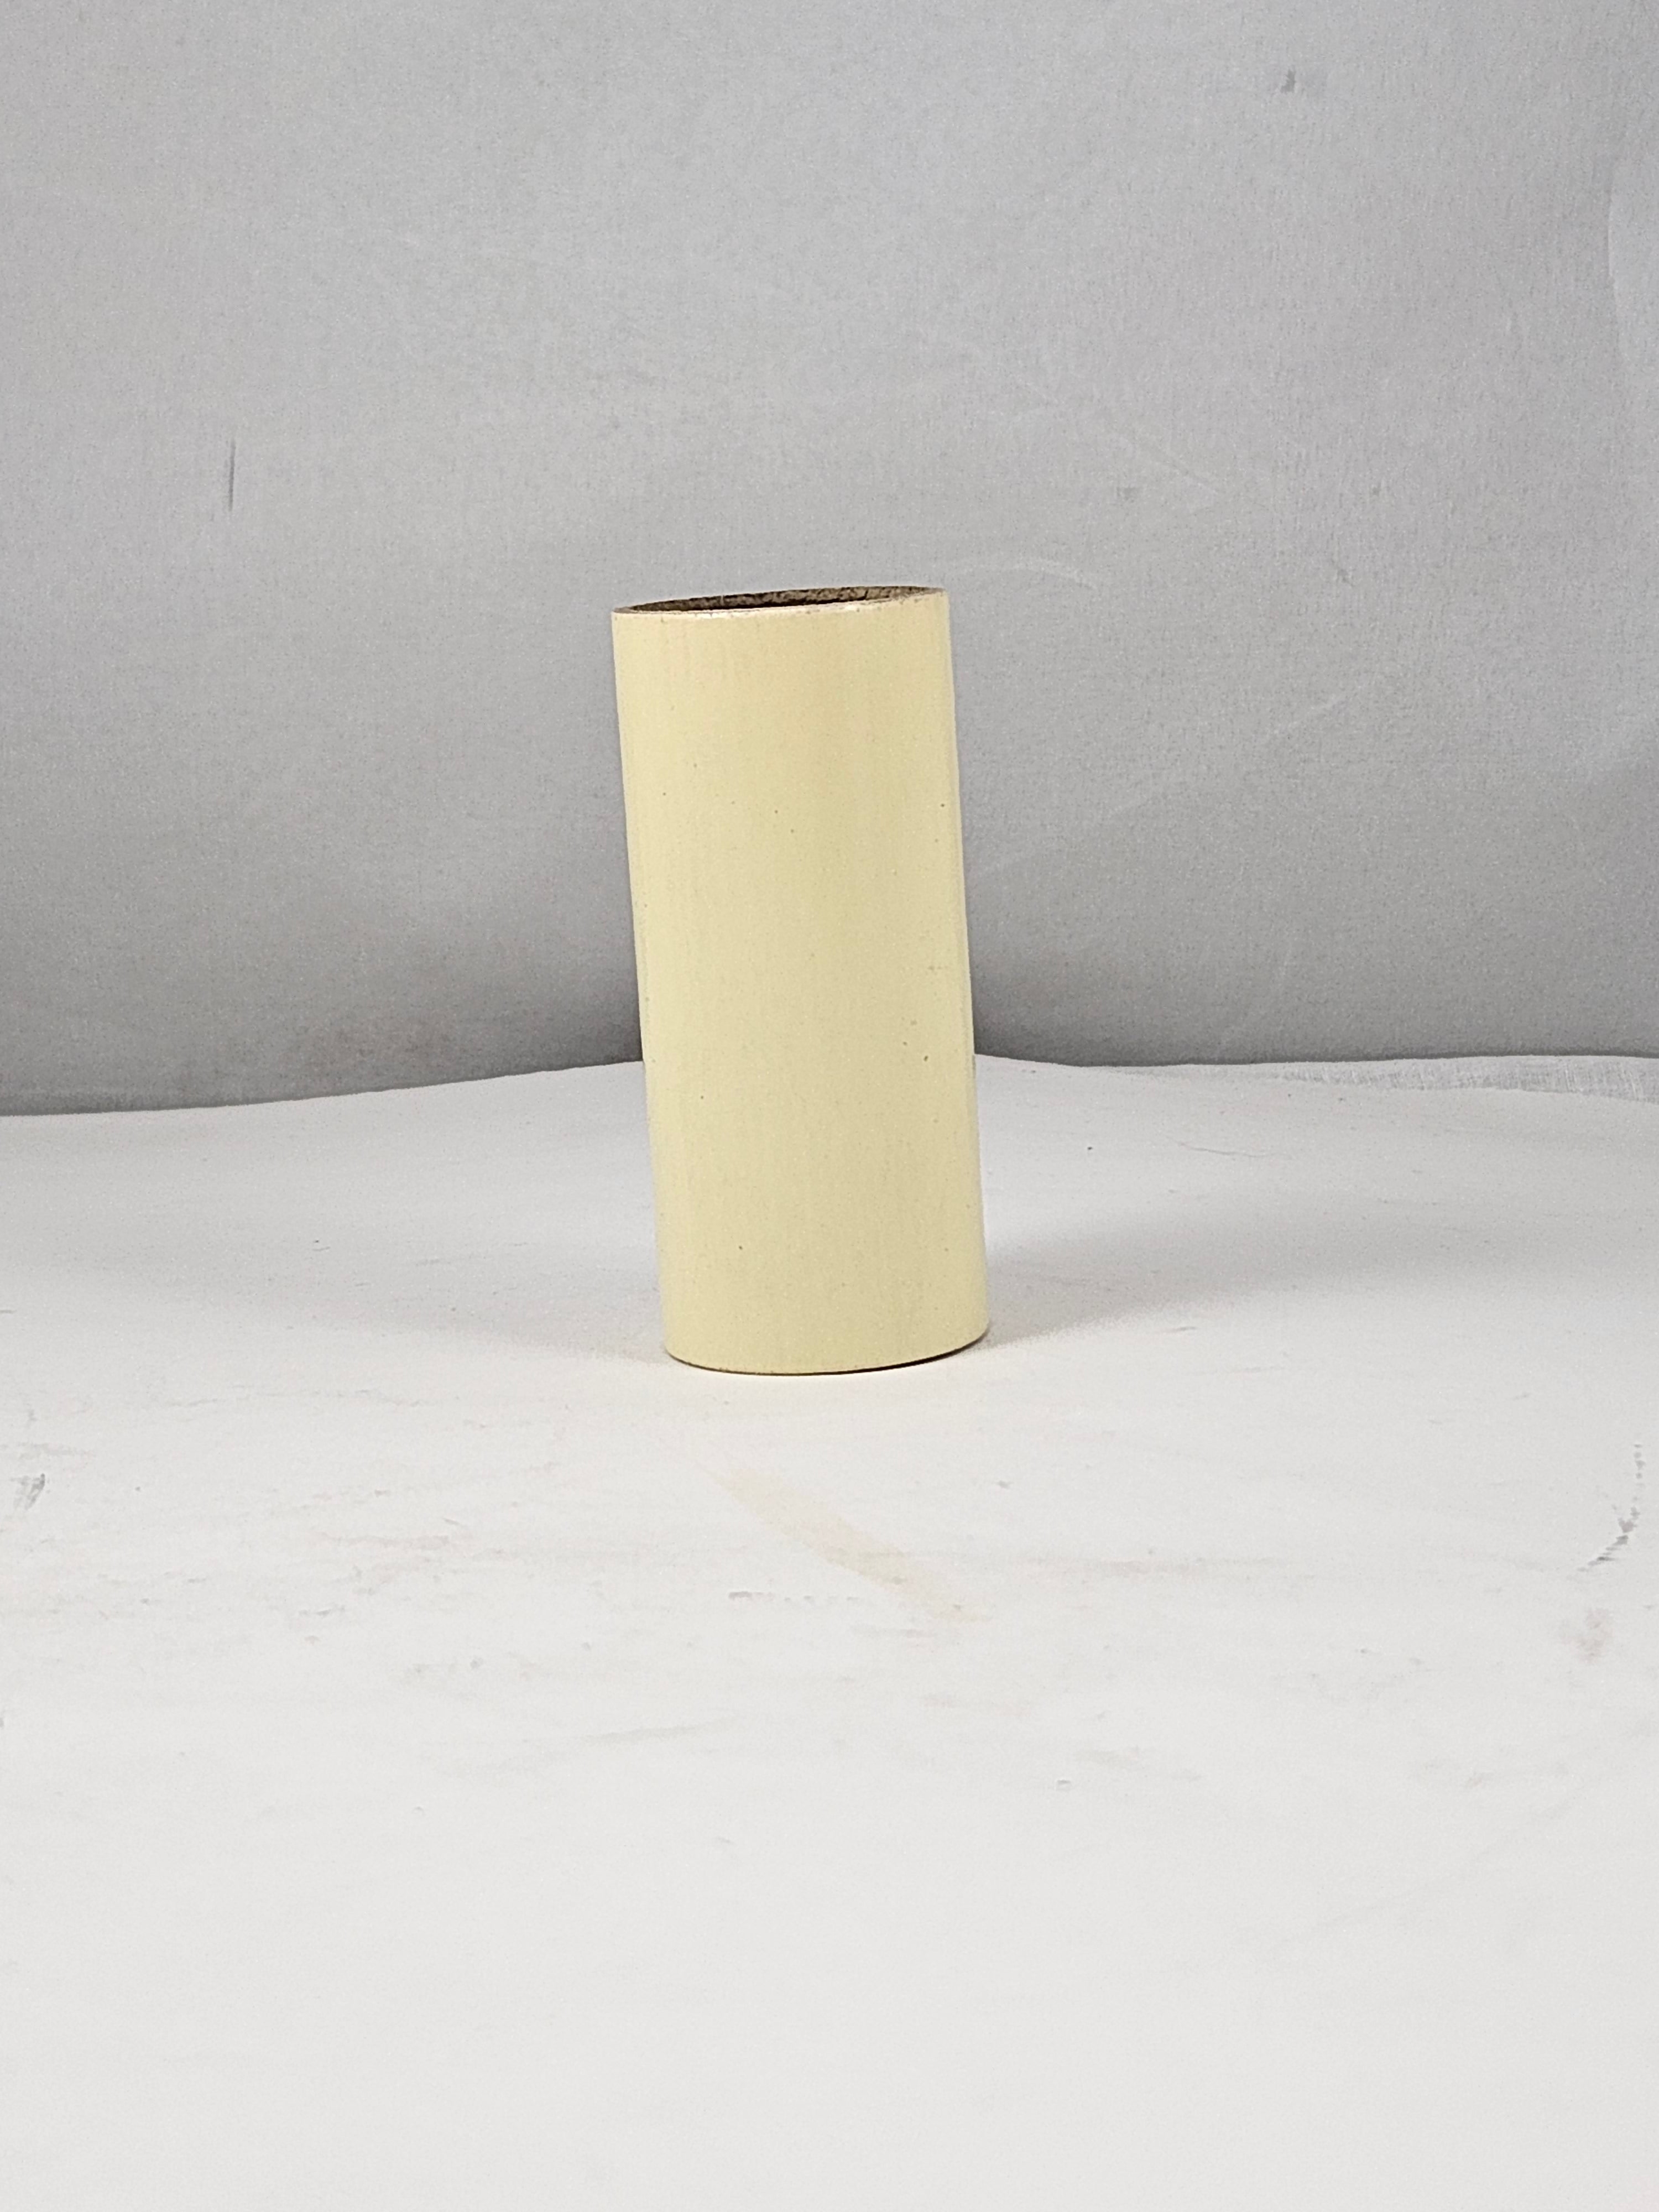 3" Paper Candle Cover in Biscuit (see more description)